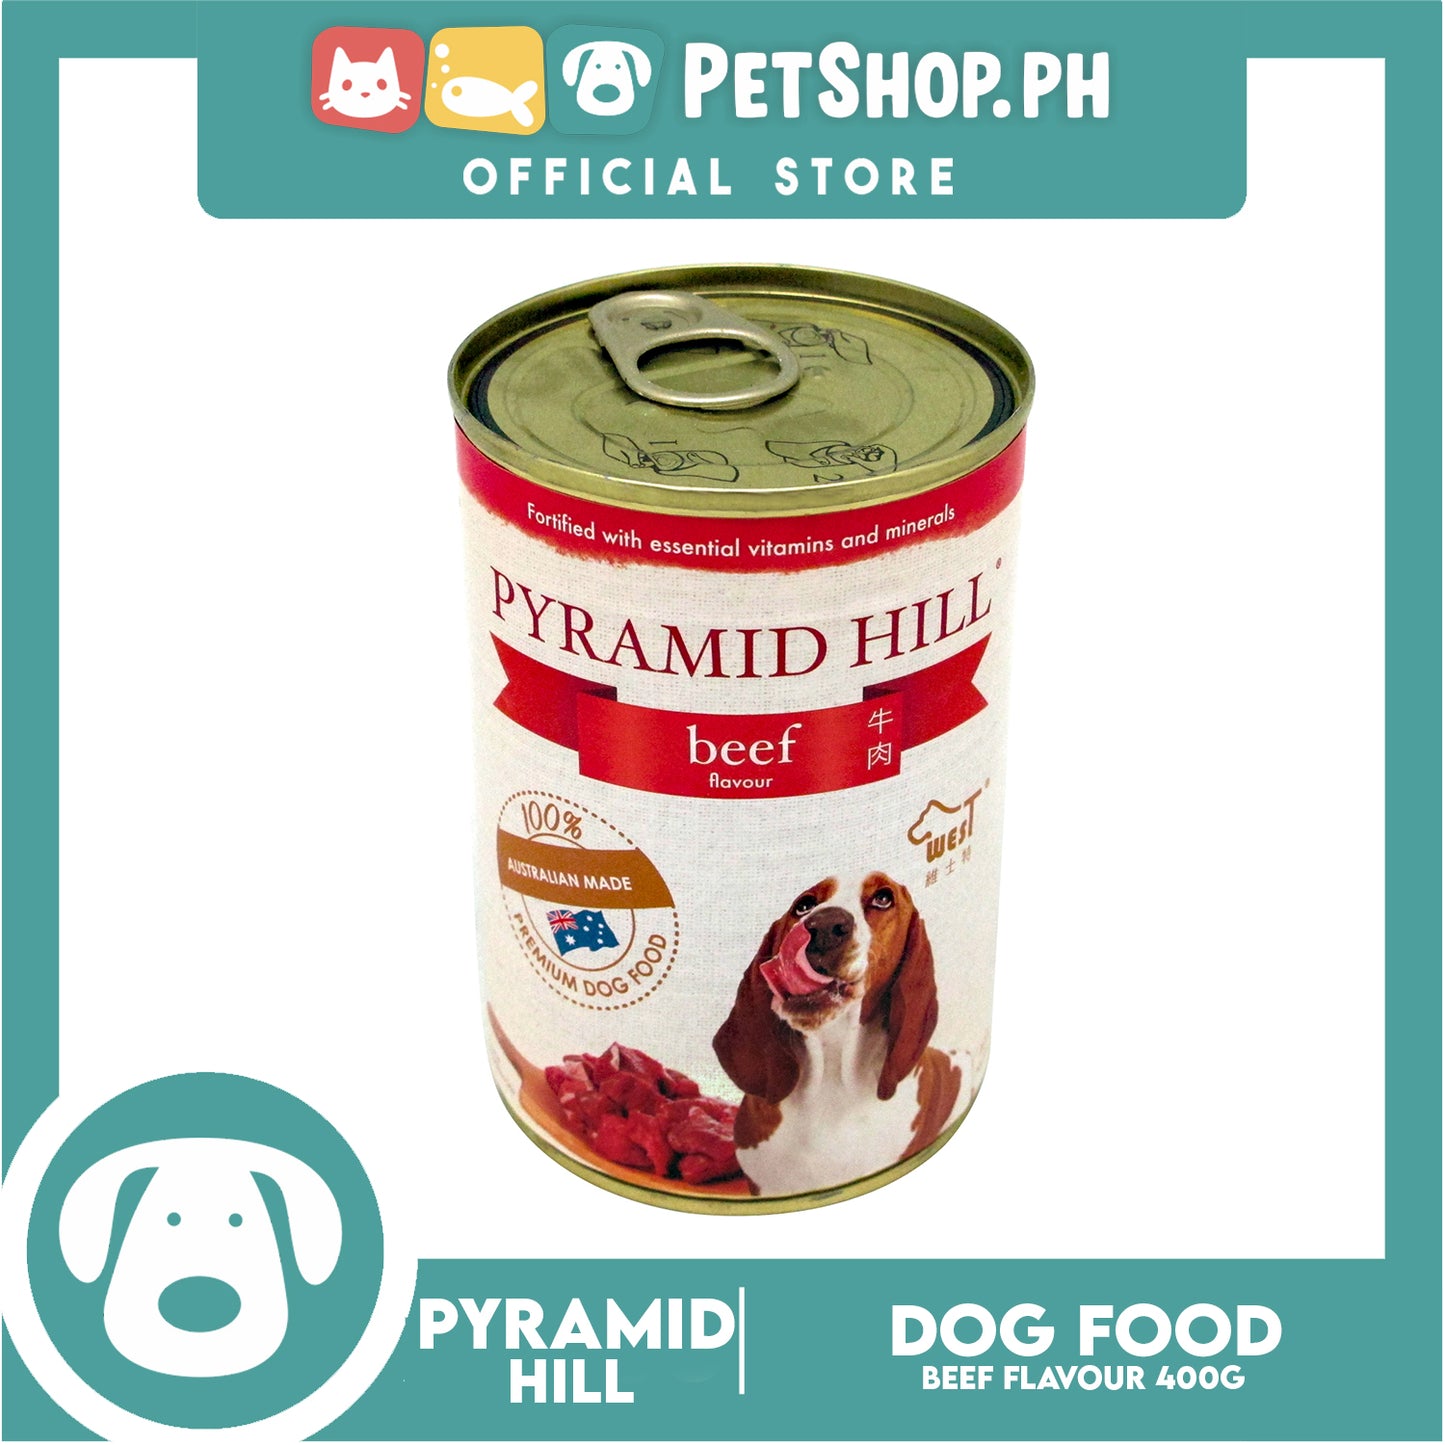 Pyramid Hill Beef Flavor 400g